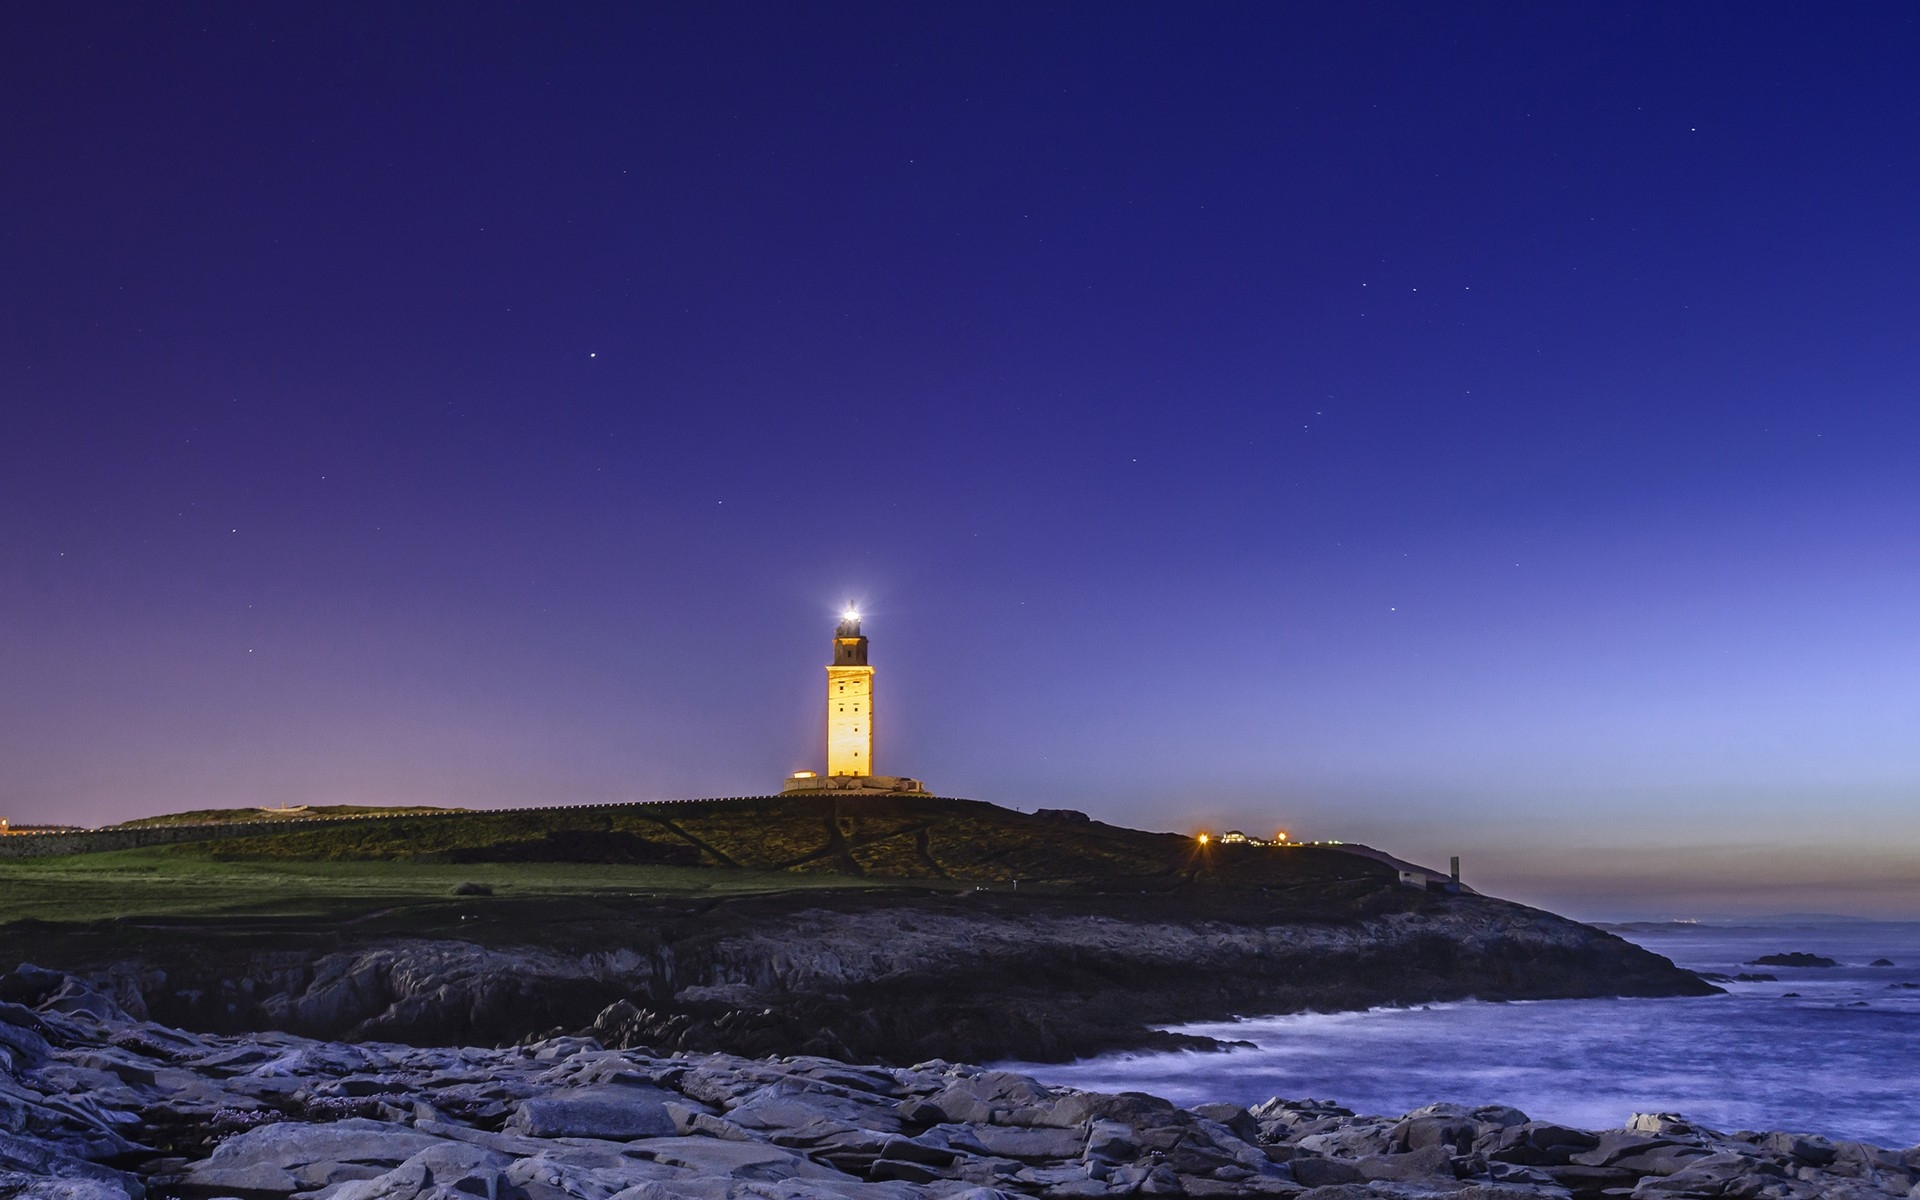 Evening In Lighthouse Sea Wallpapers